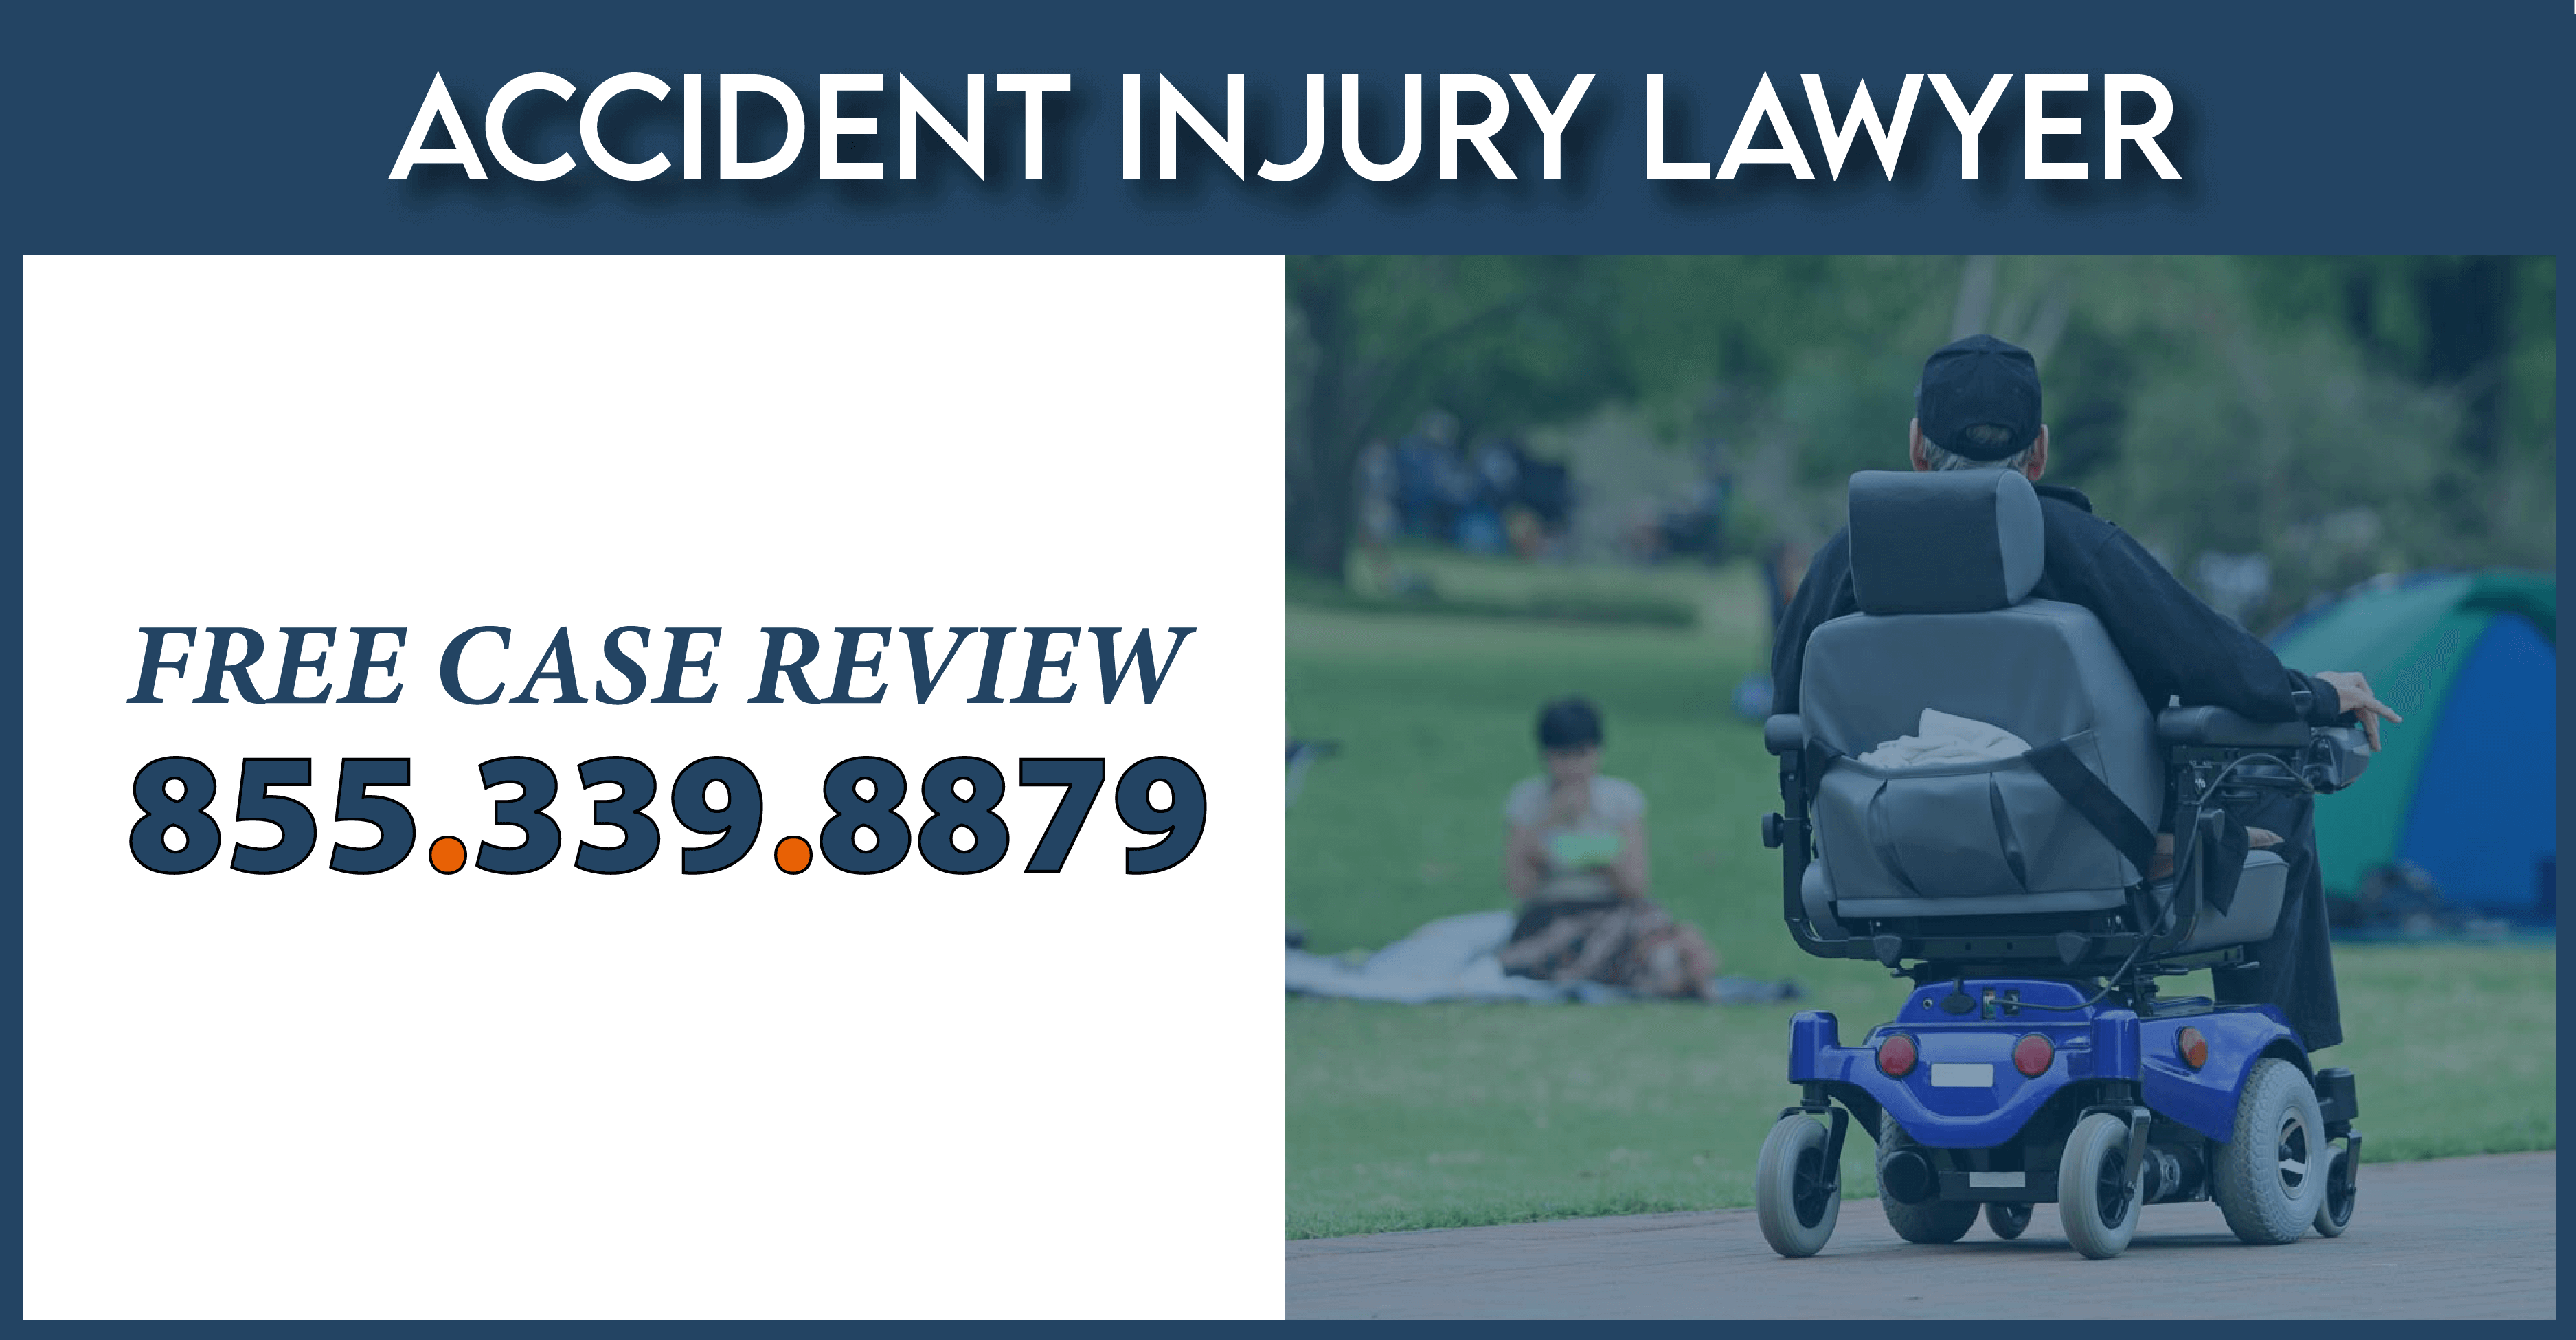 electric wheelchair defect injury attorney accident incident liability compensation